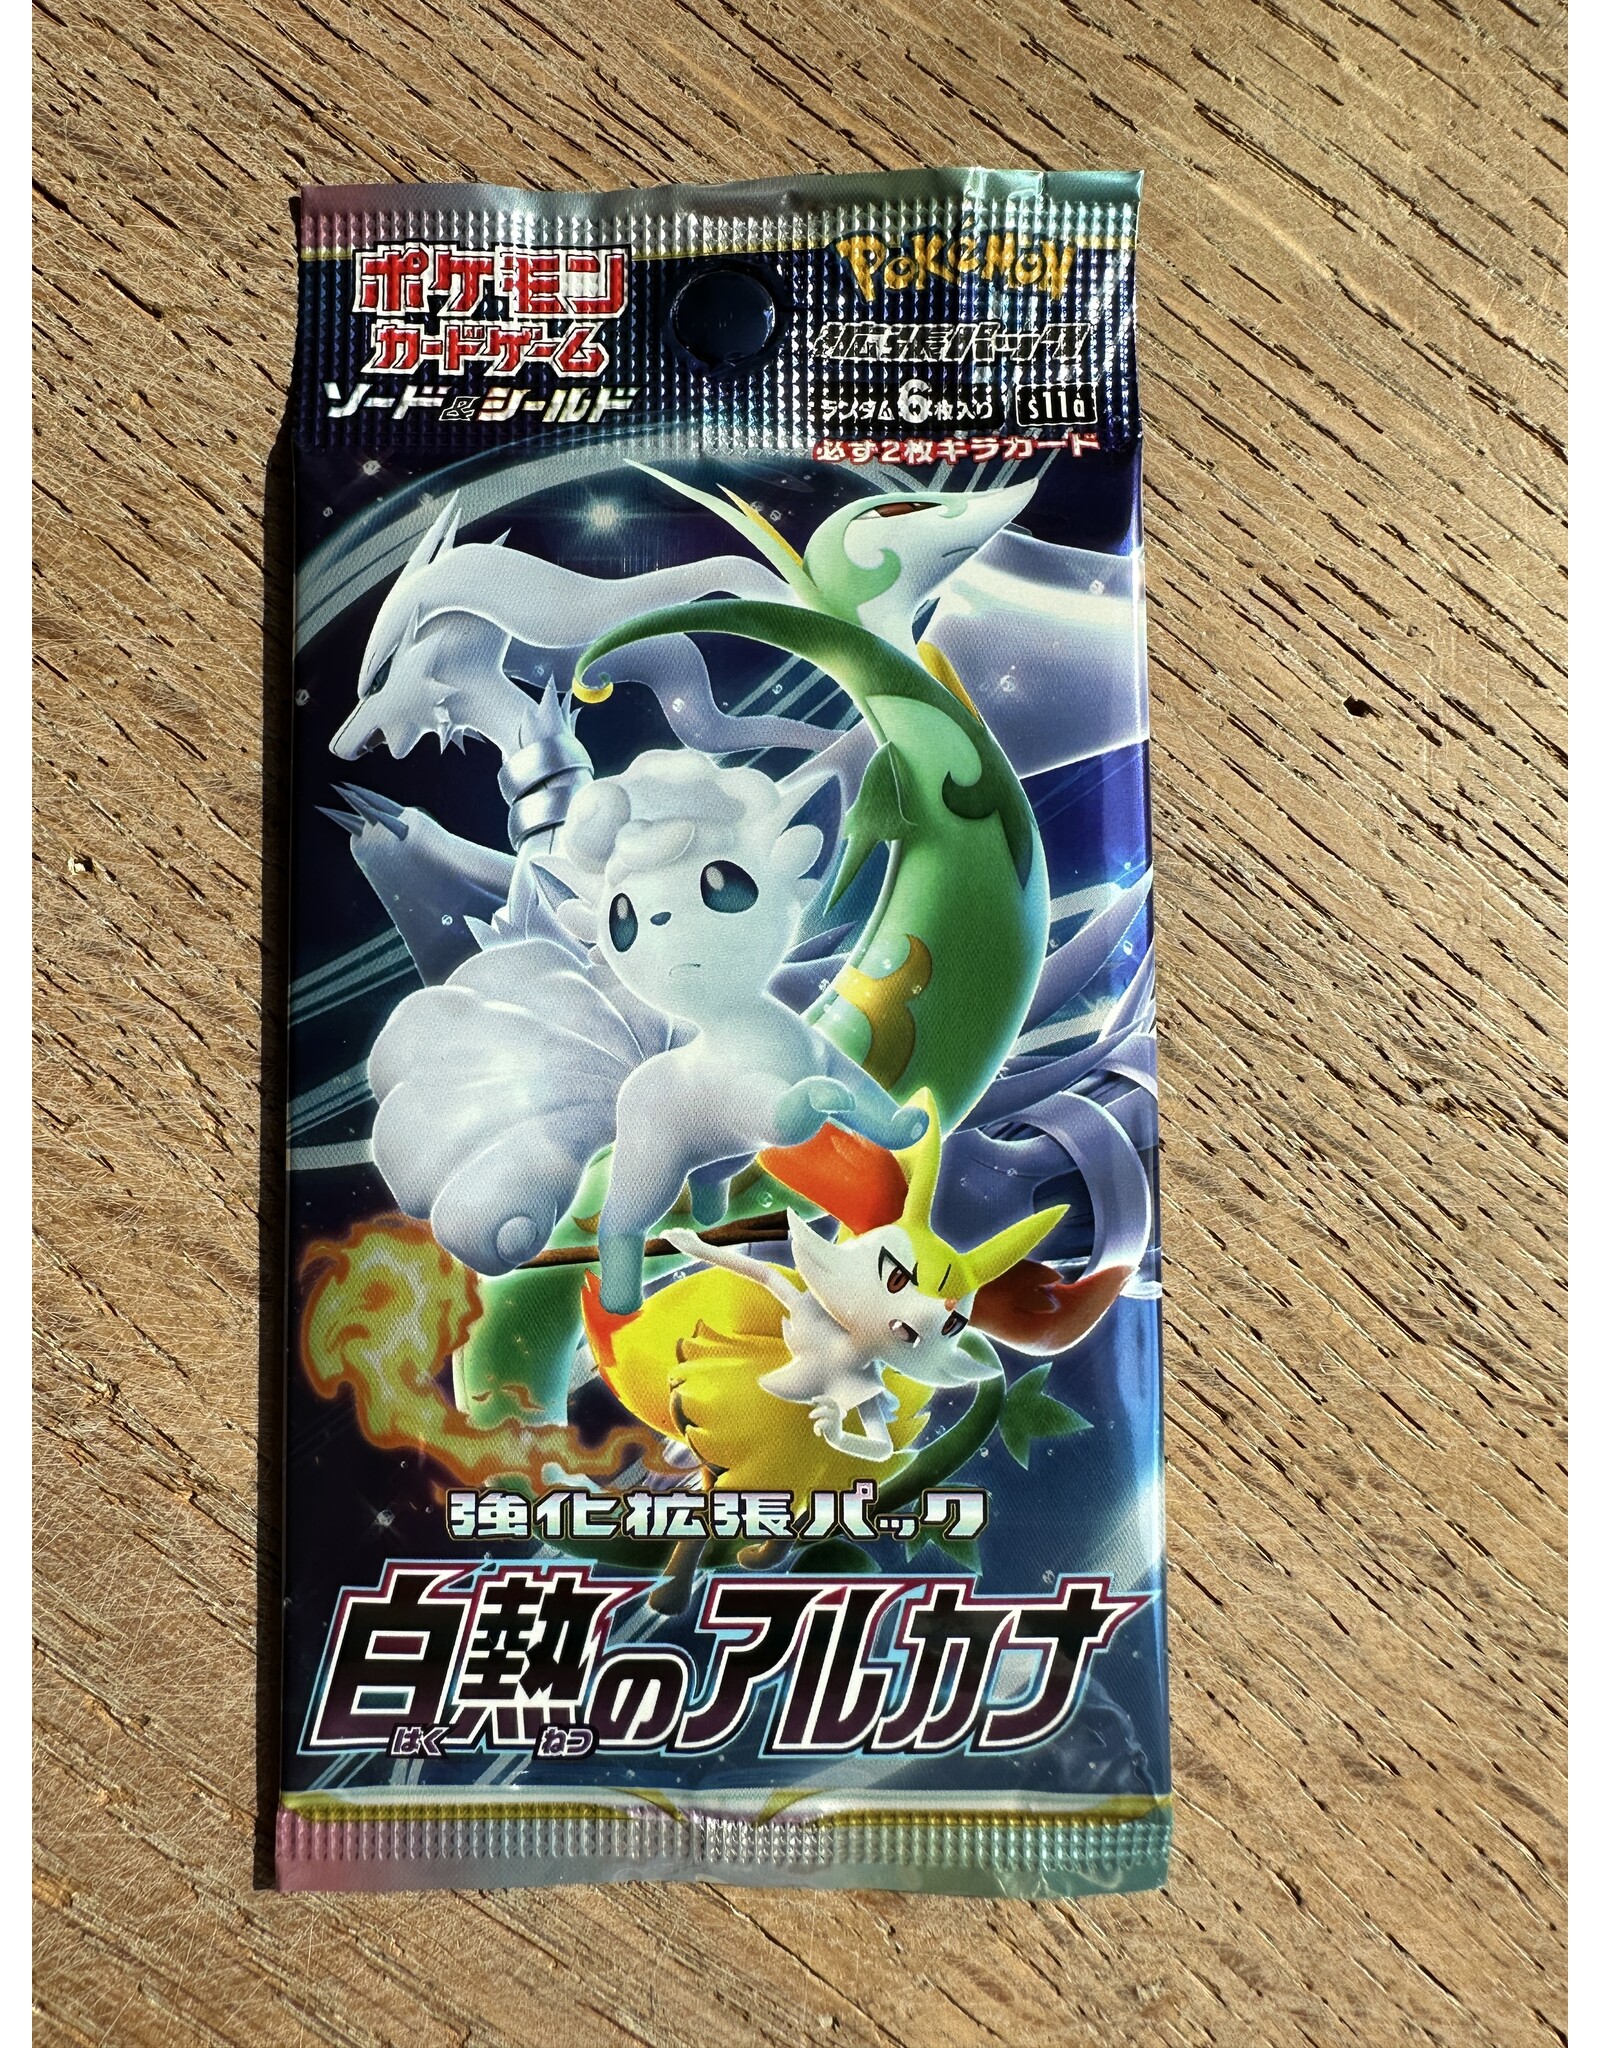 Incandescent Arcana Booster Pack Japanese